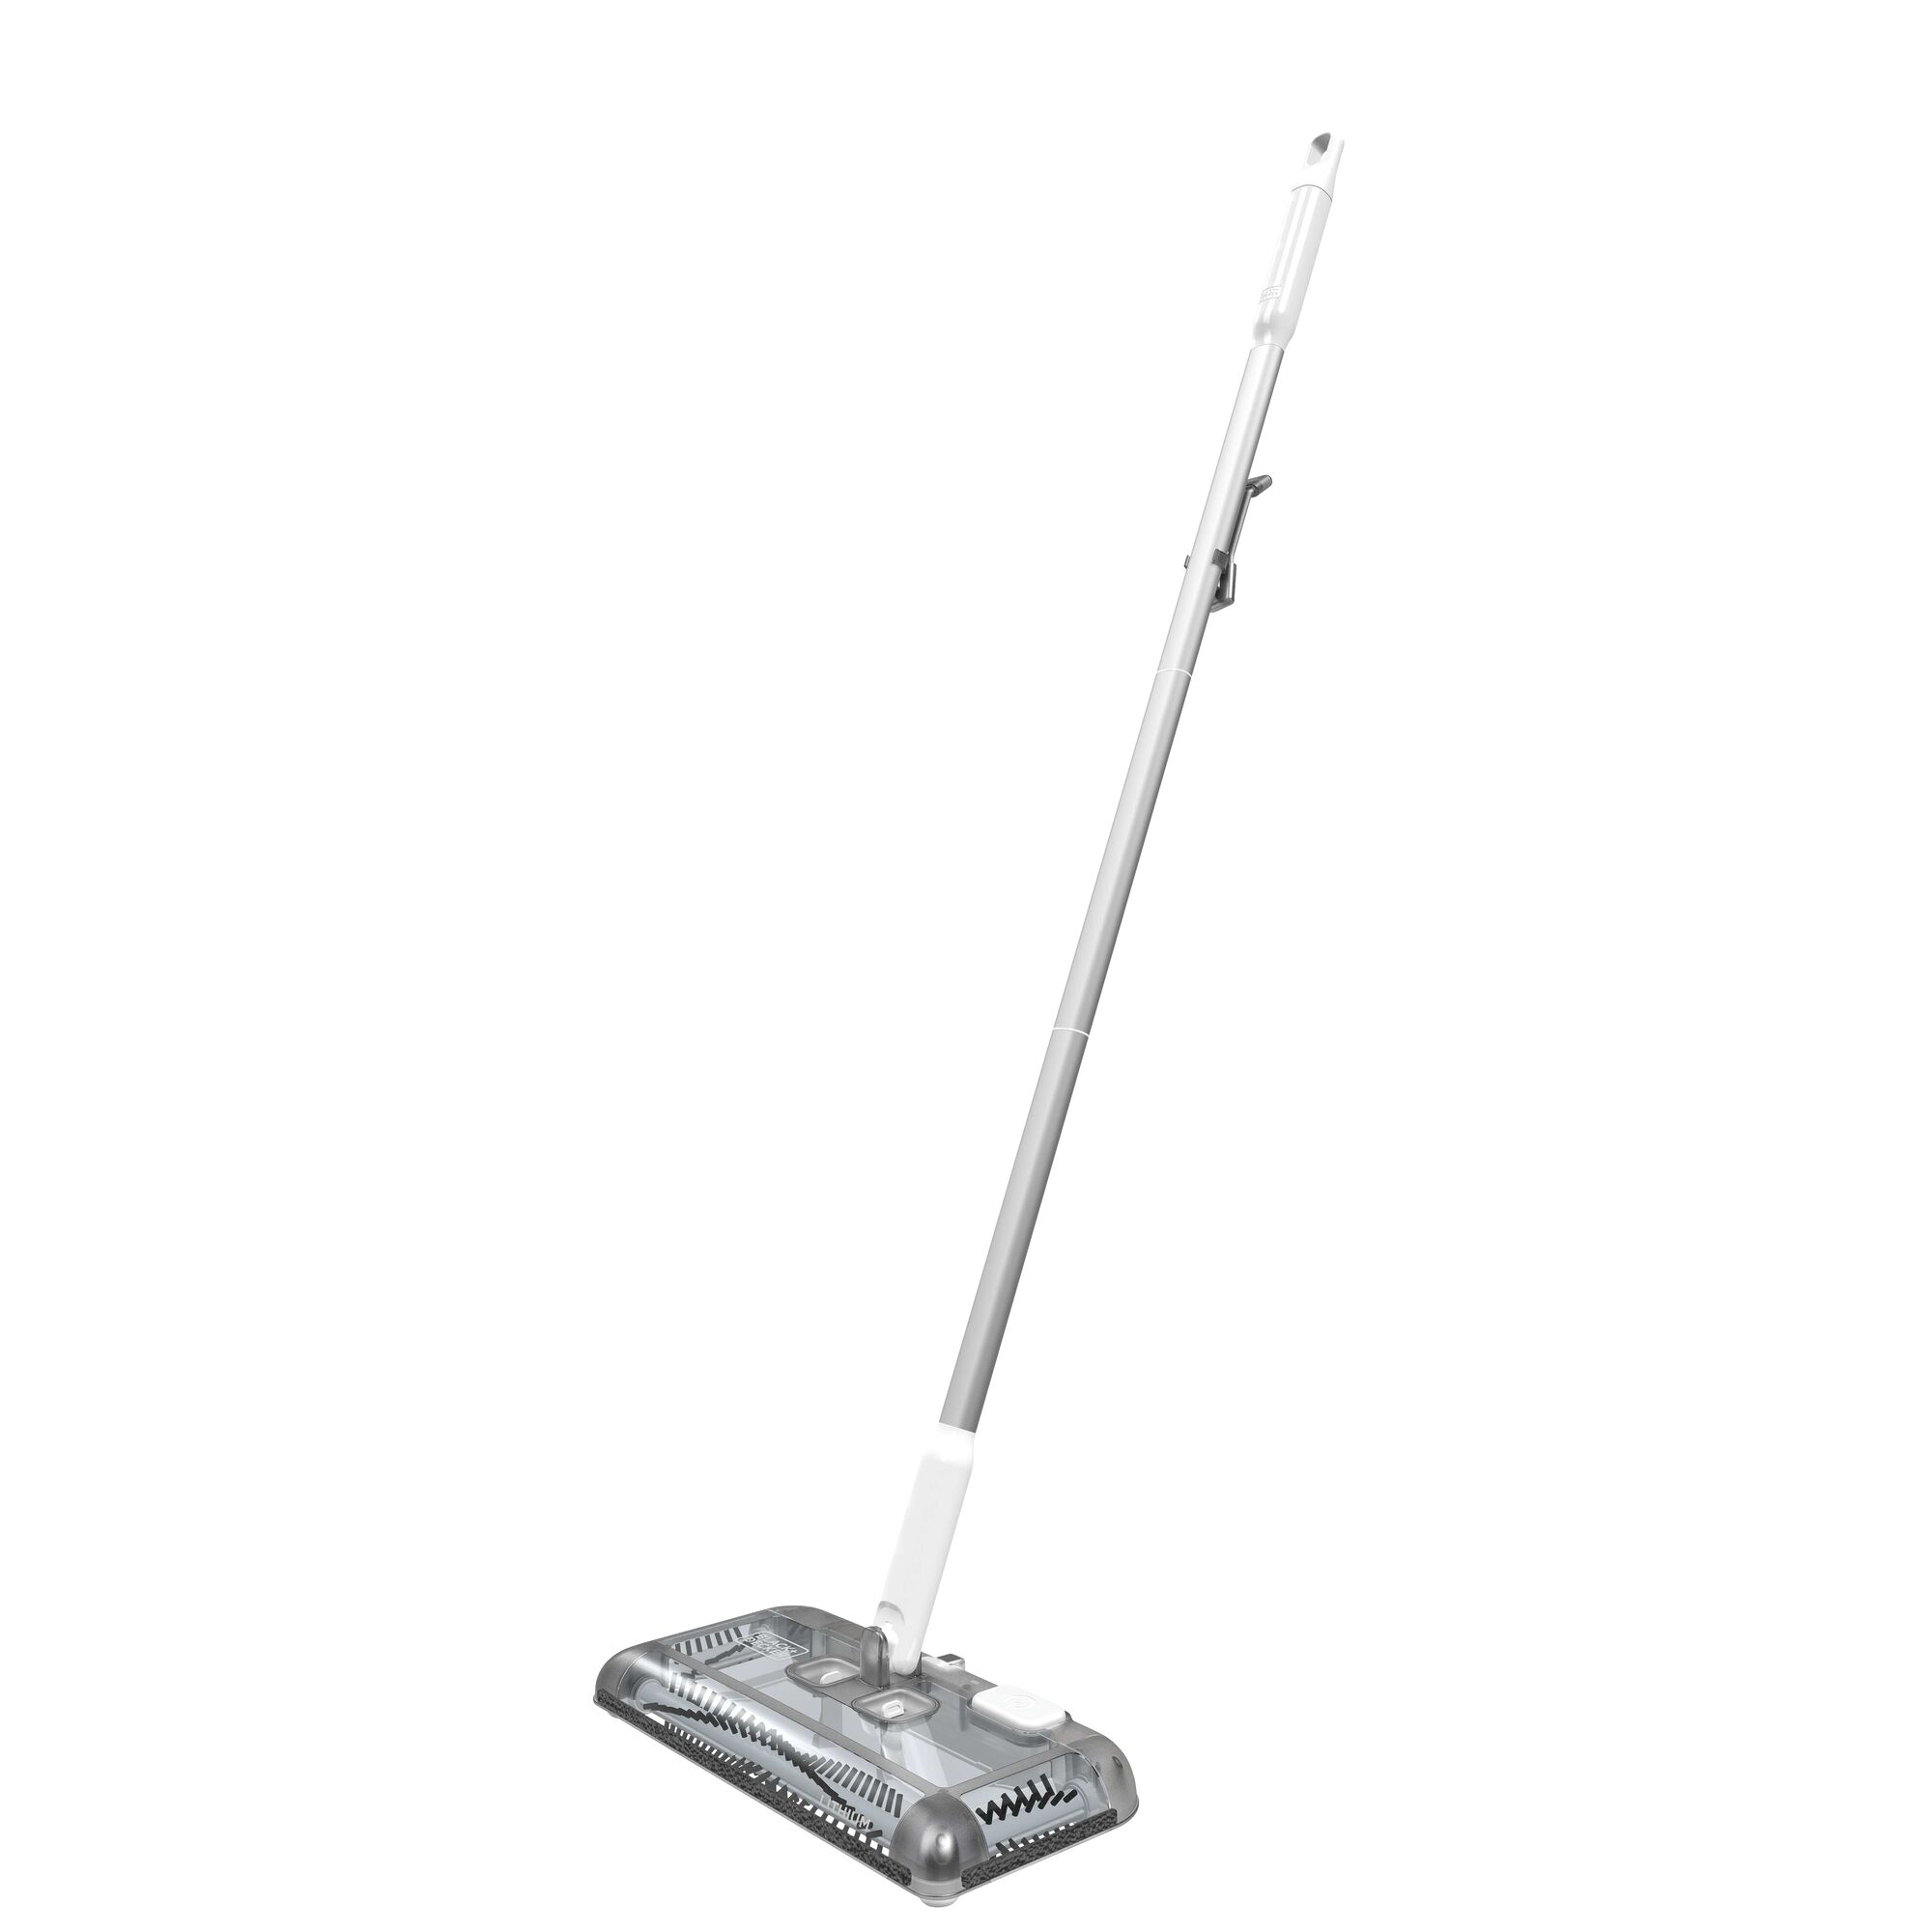 Profile of 50 minutes powered floor sweeper.